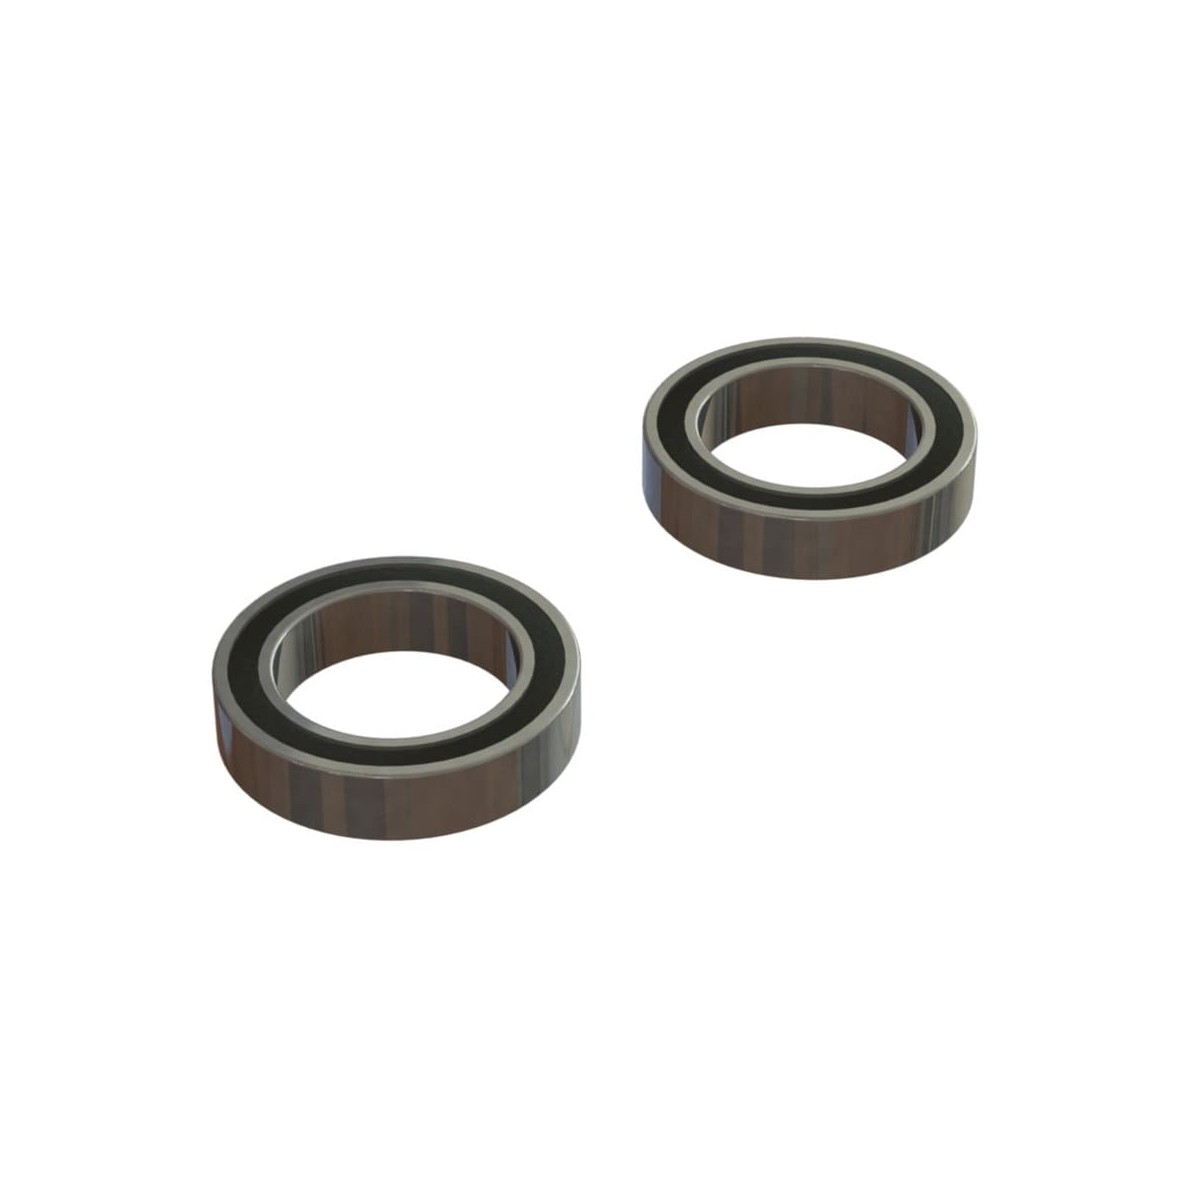 10x15x4mm 2rs bearings replaces Arrma part number AR610001 2 pack 